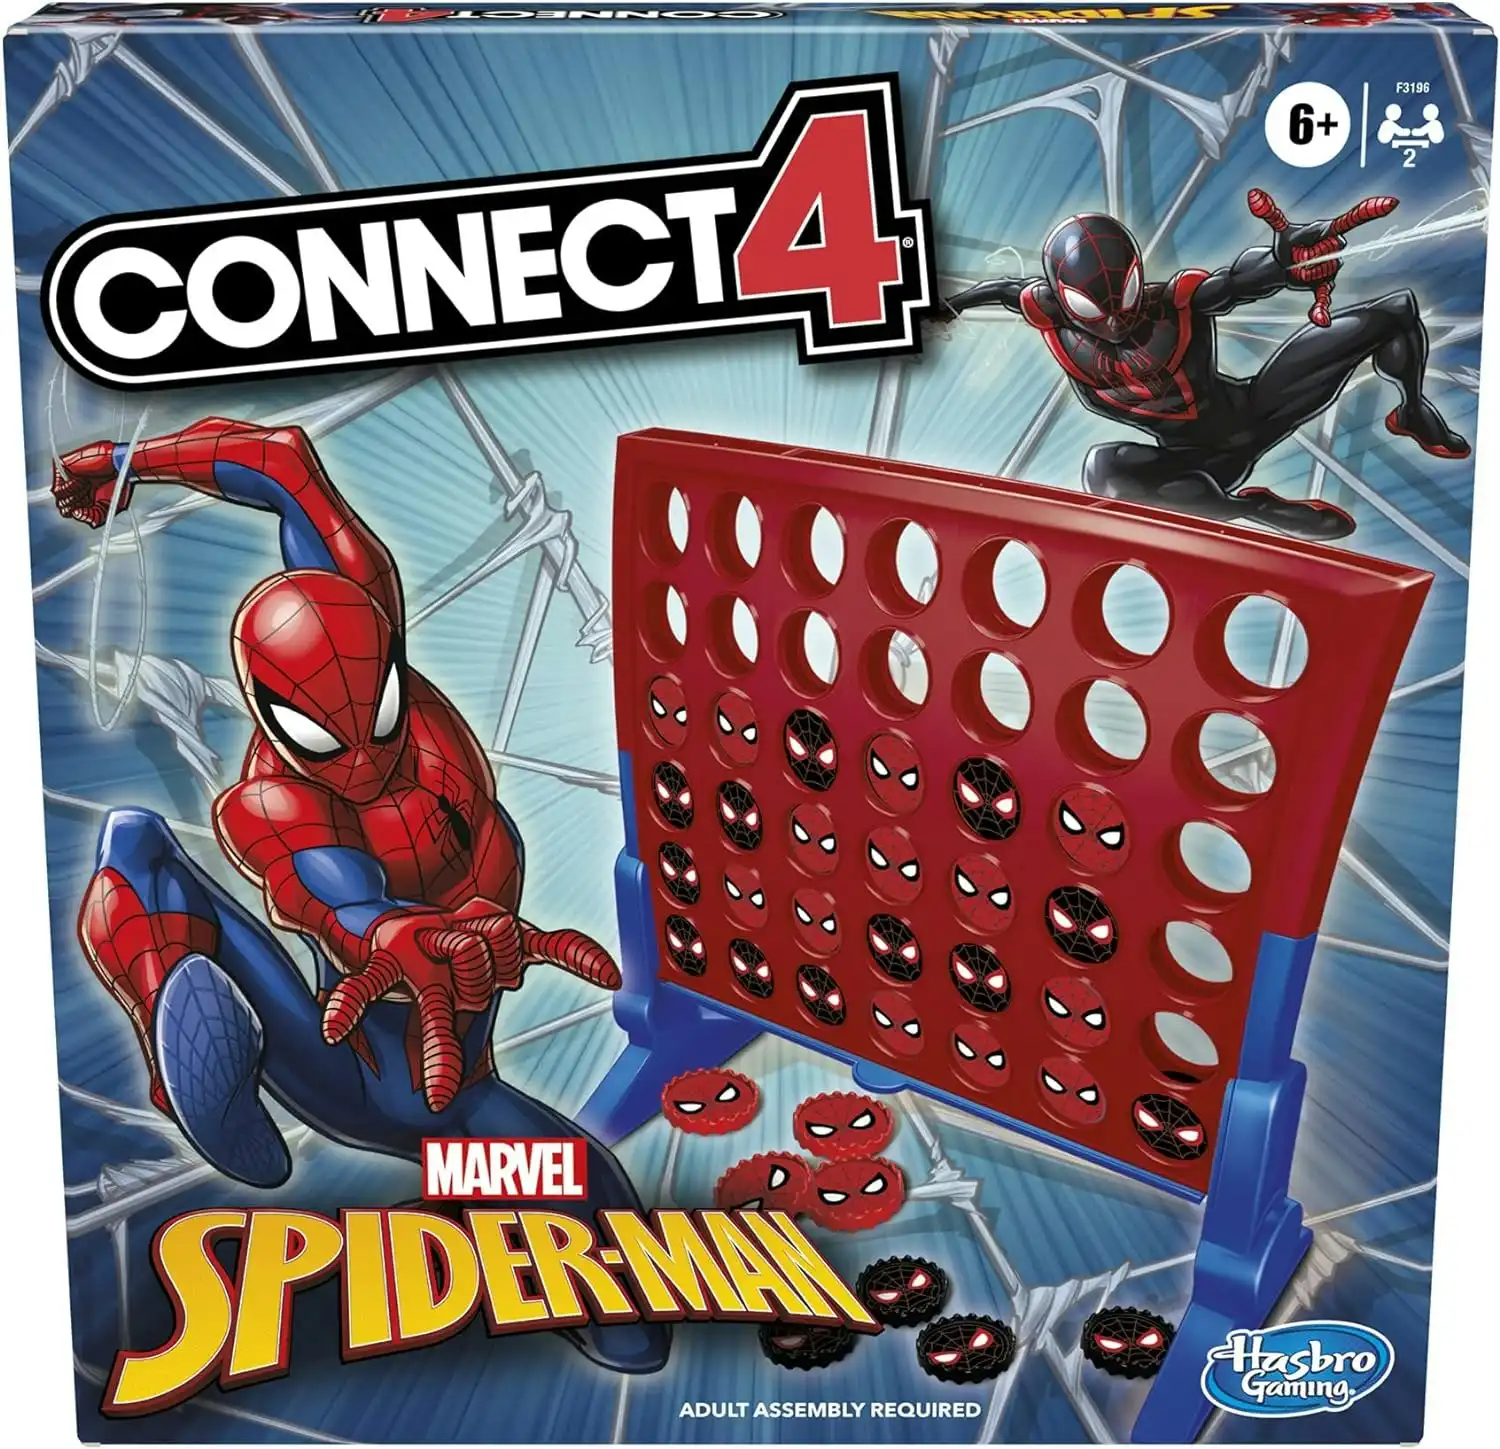 Connect 4 Game: Marvel Spider-Man Edition